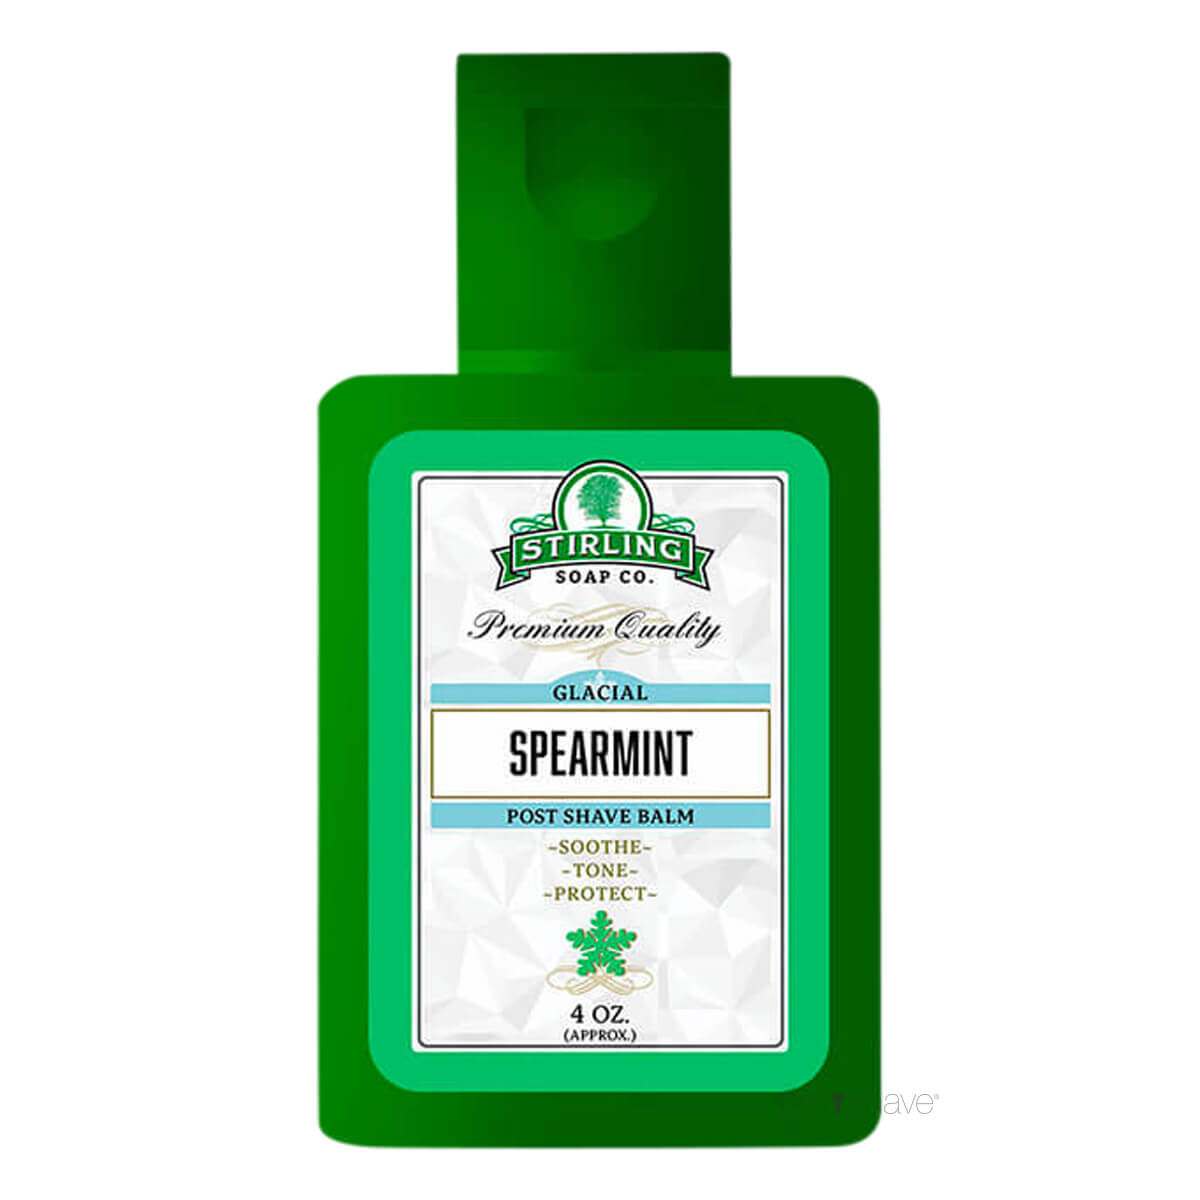 Stirling Soap Co. Aftershave Balm, Glacial Spearmint, 118 ml.